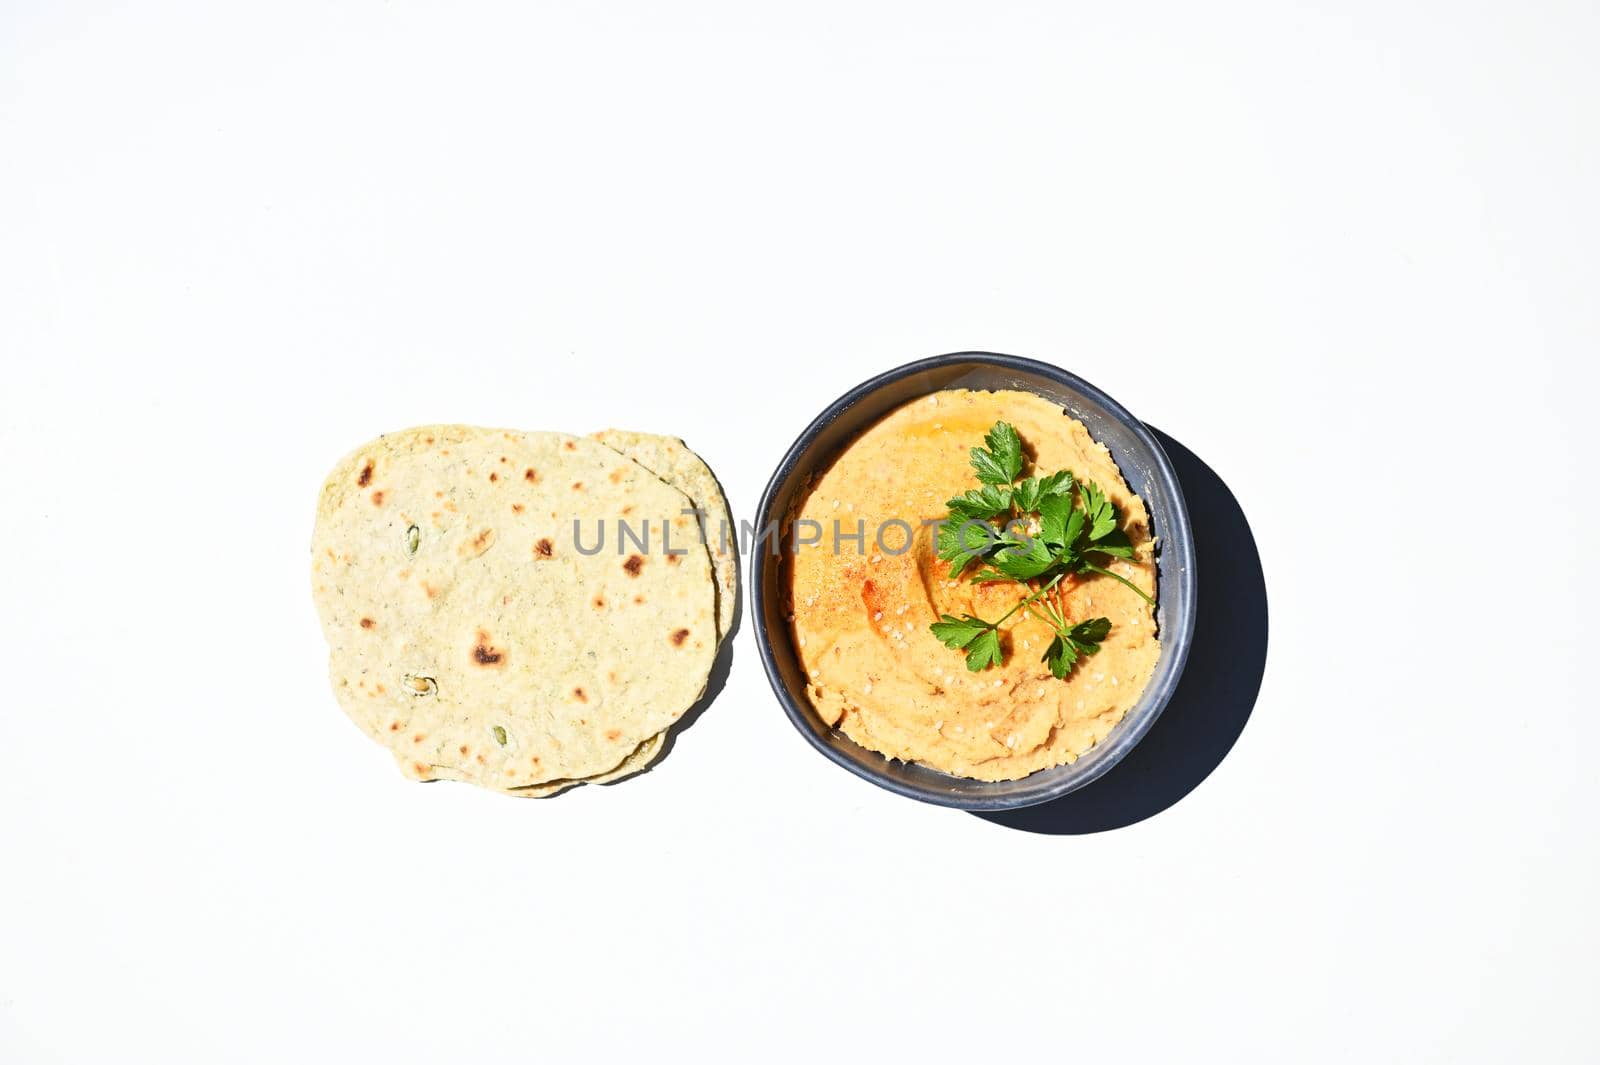 Flat lay composition with pita bread and a bowl of chickpea hummus, sprinkled with paprika, olive oil and parsley, isolated on white background with copy space for advertising text